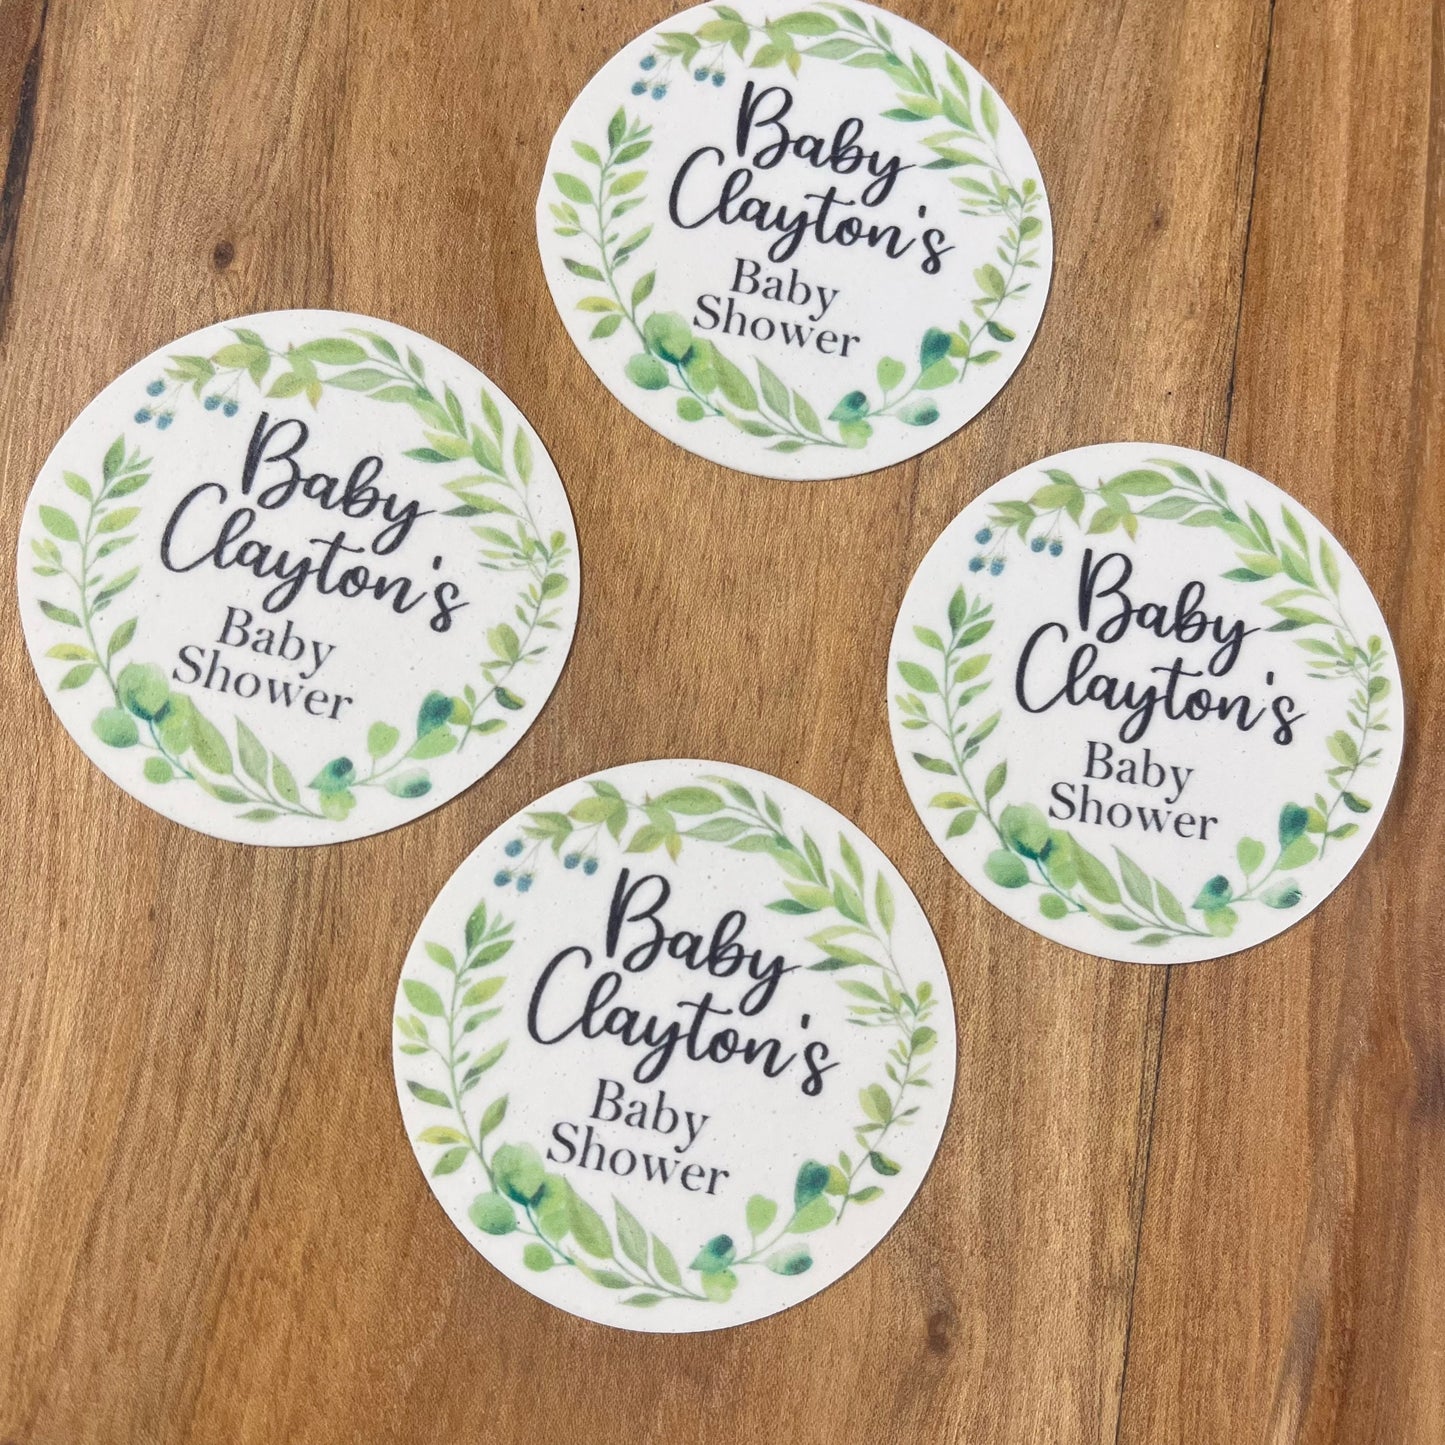 Edible personalised cupcake toppers, Pretty Greenery floral design